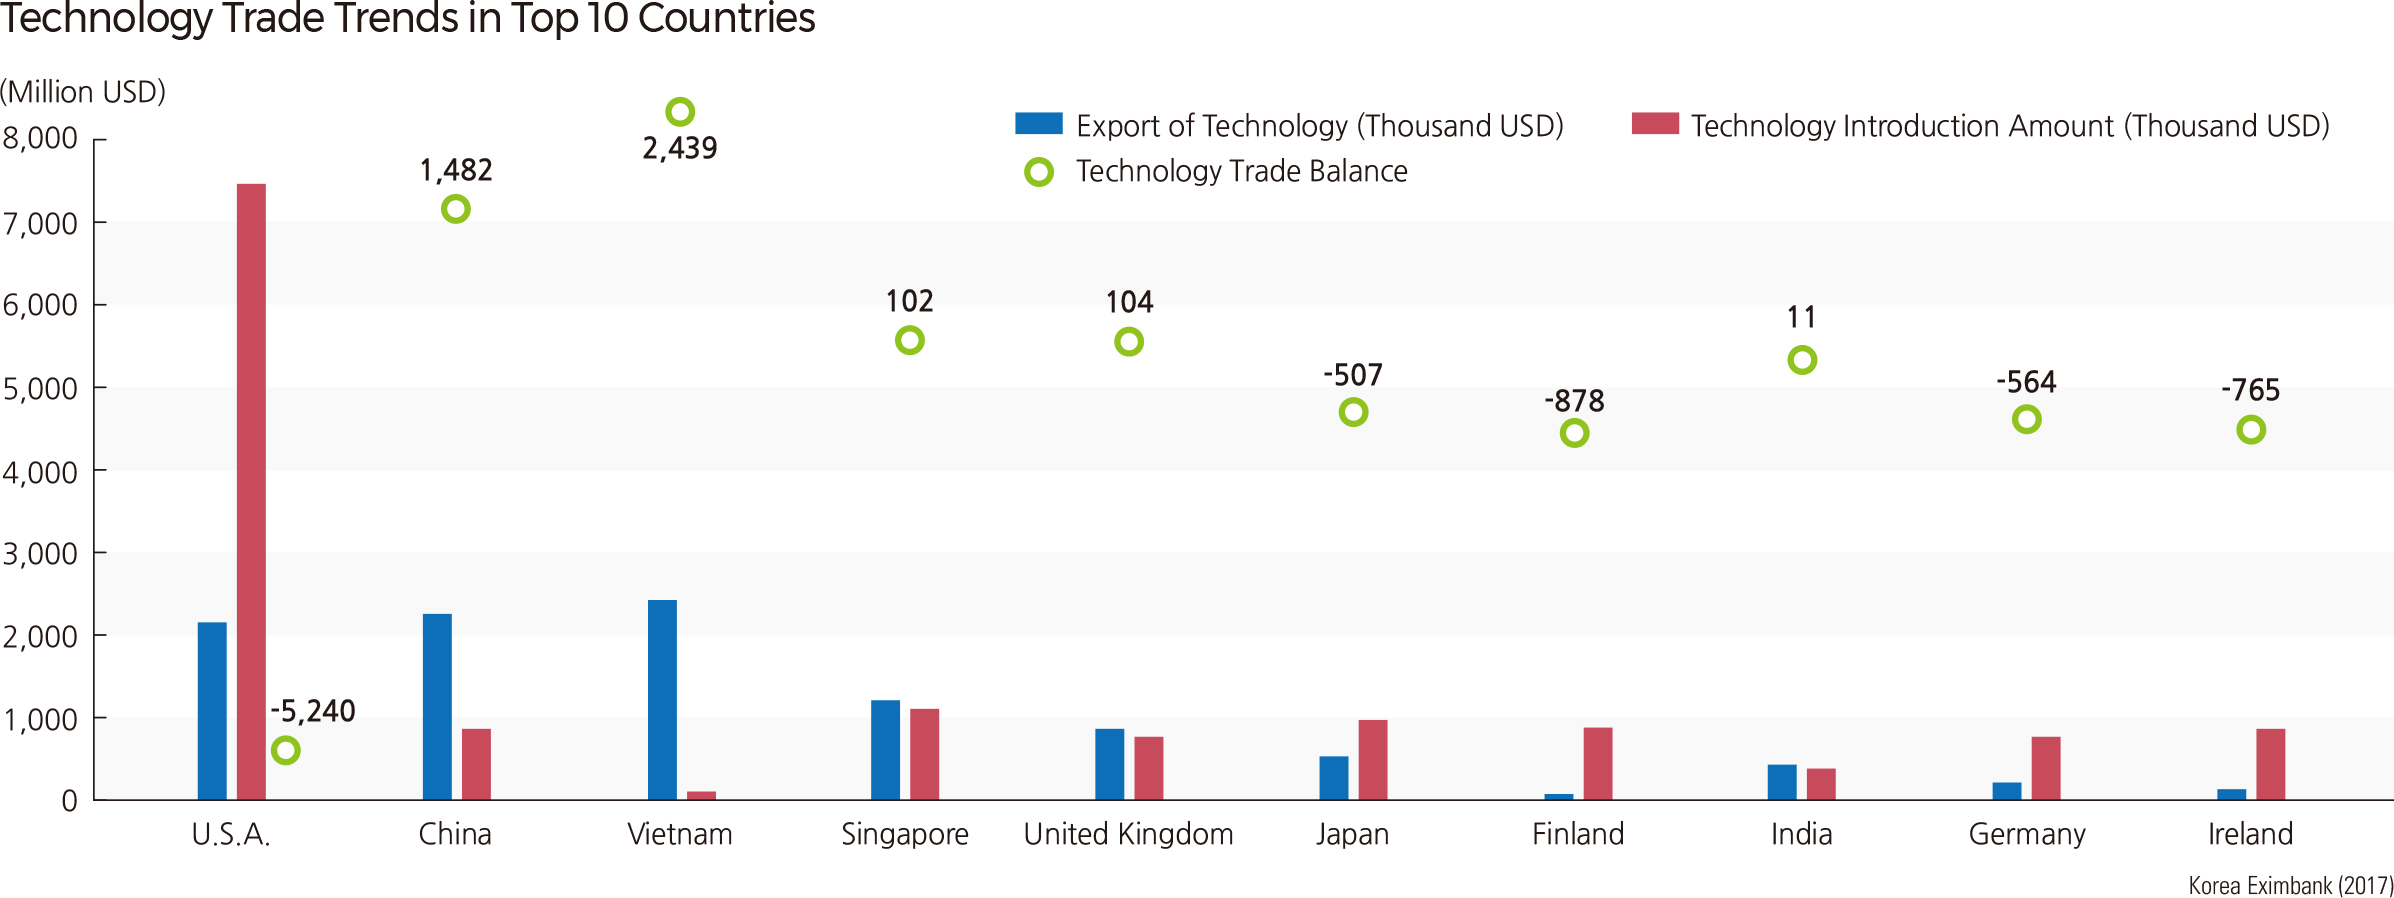 Technology Trade Trends in Top 10 Countries